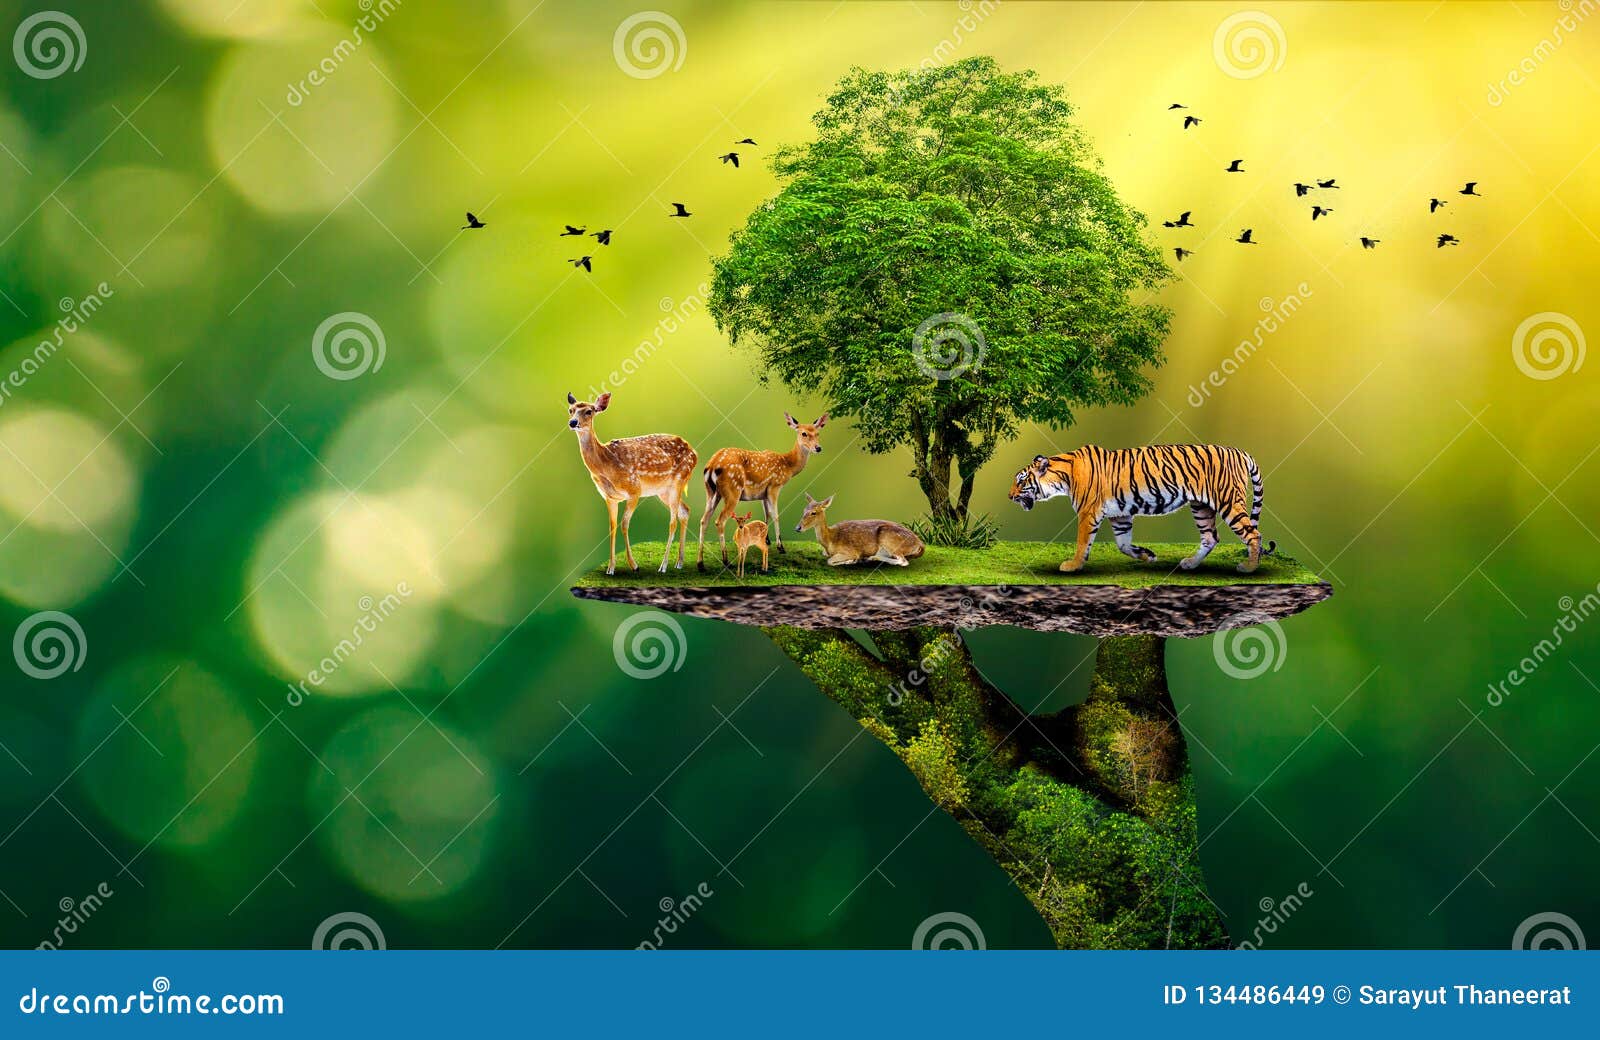 concept nature reserve conserve wildlife reserve tiger deer global warming food loaf ecology human hands protecting the wild and w